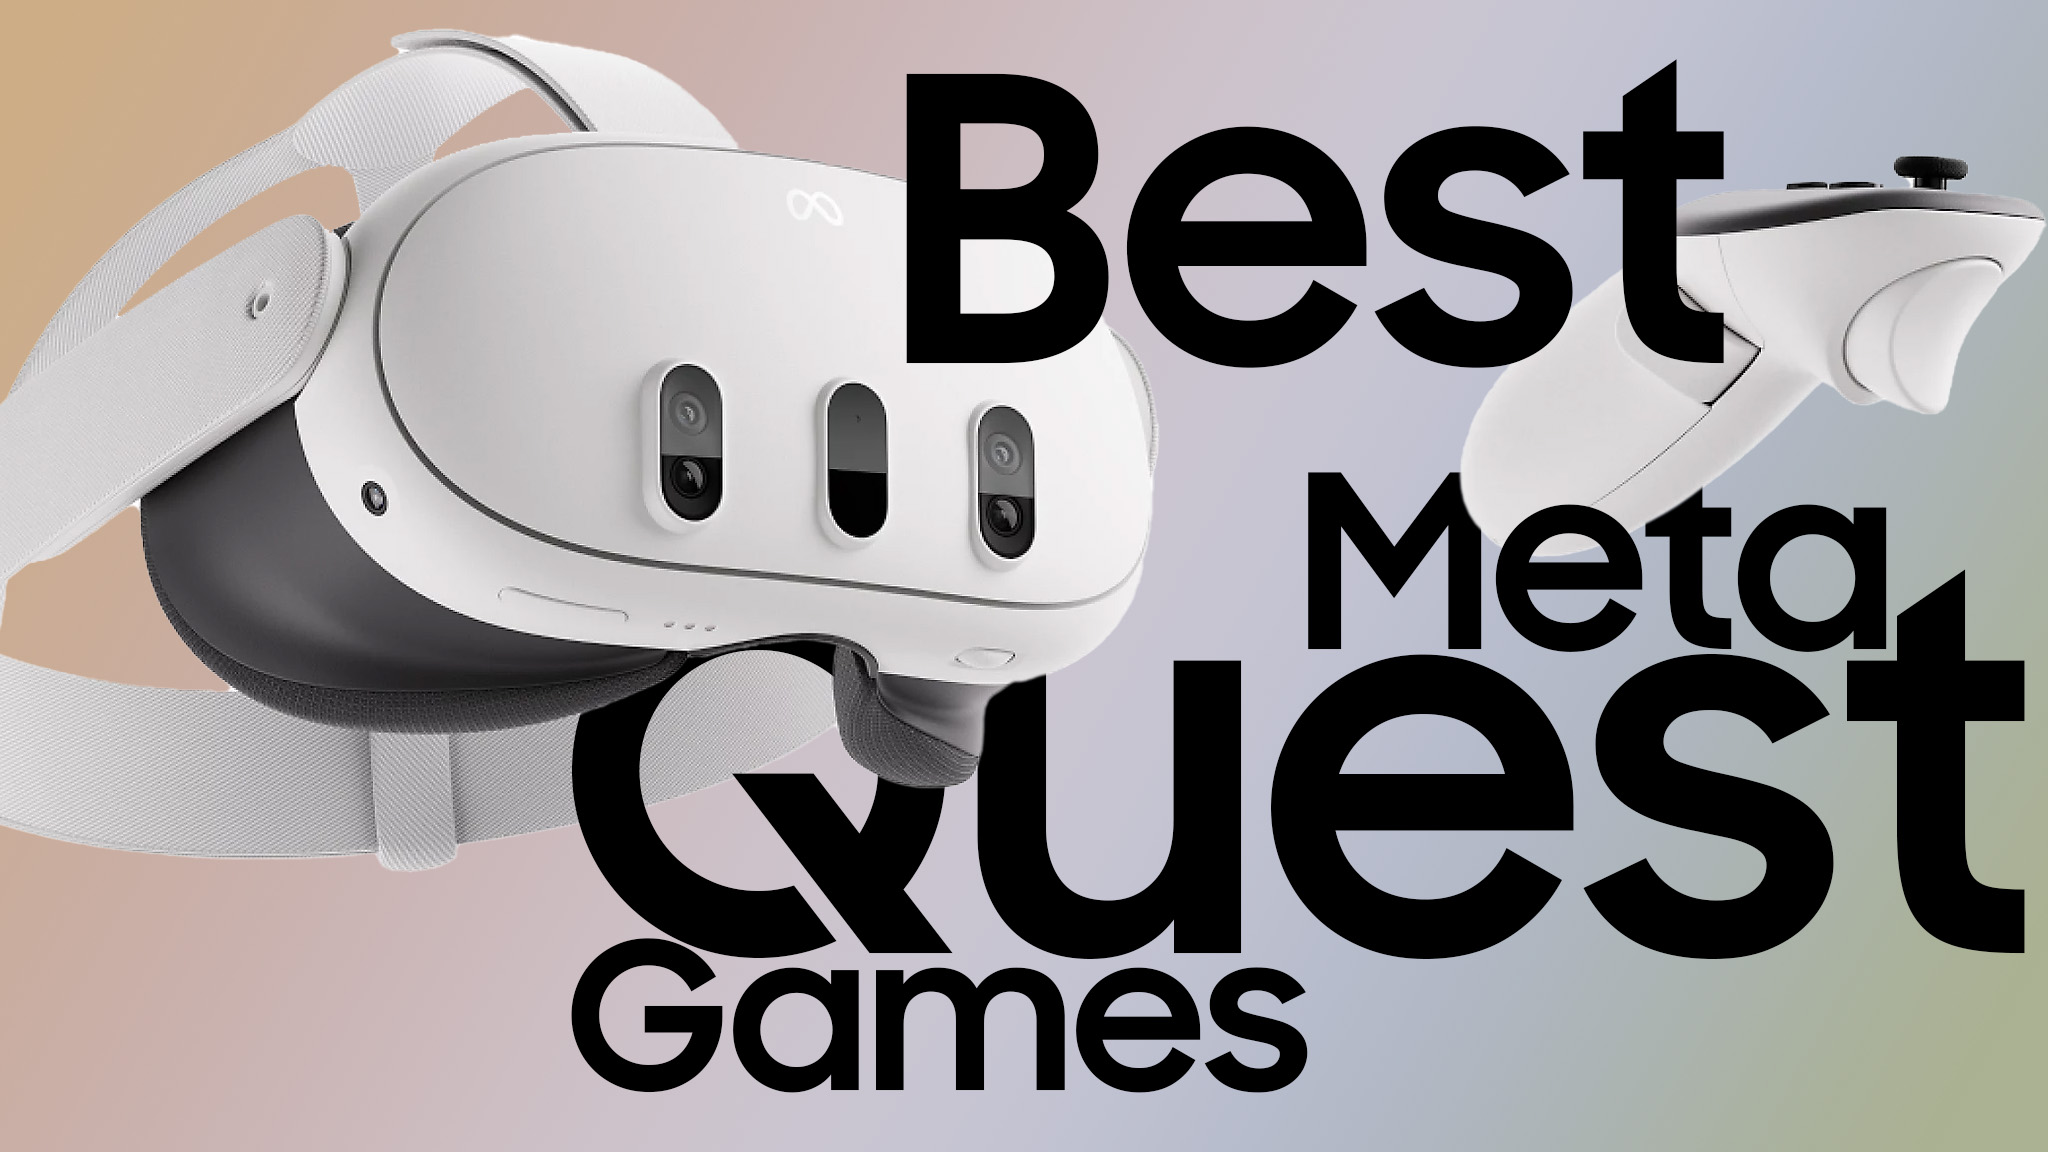 TOP 15 QUEST 3 MULTIPLAYER GAMES YOU SHOULD BE PLAYING! 